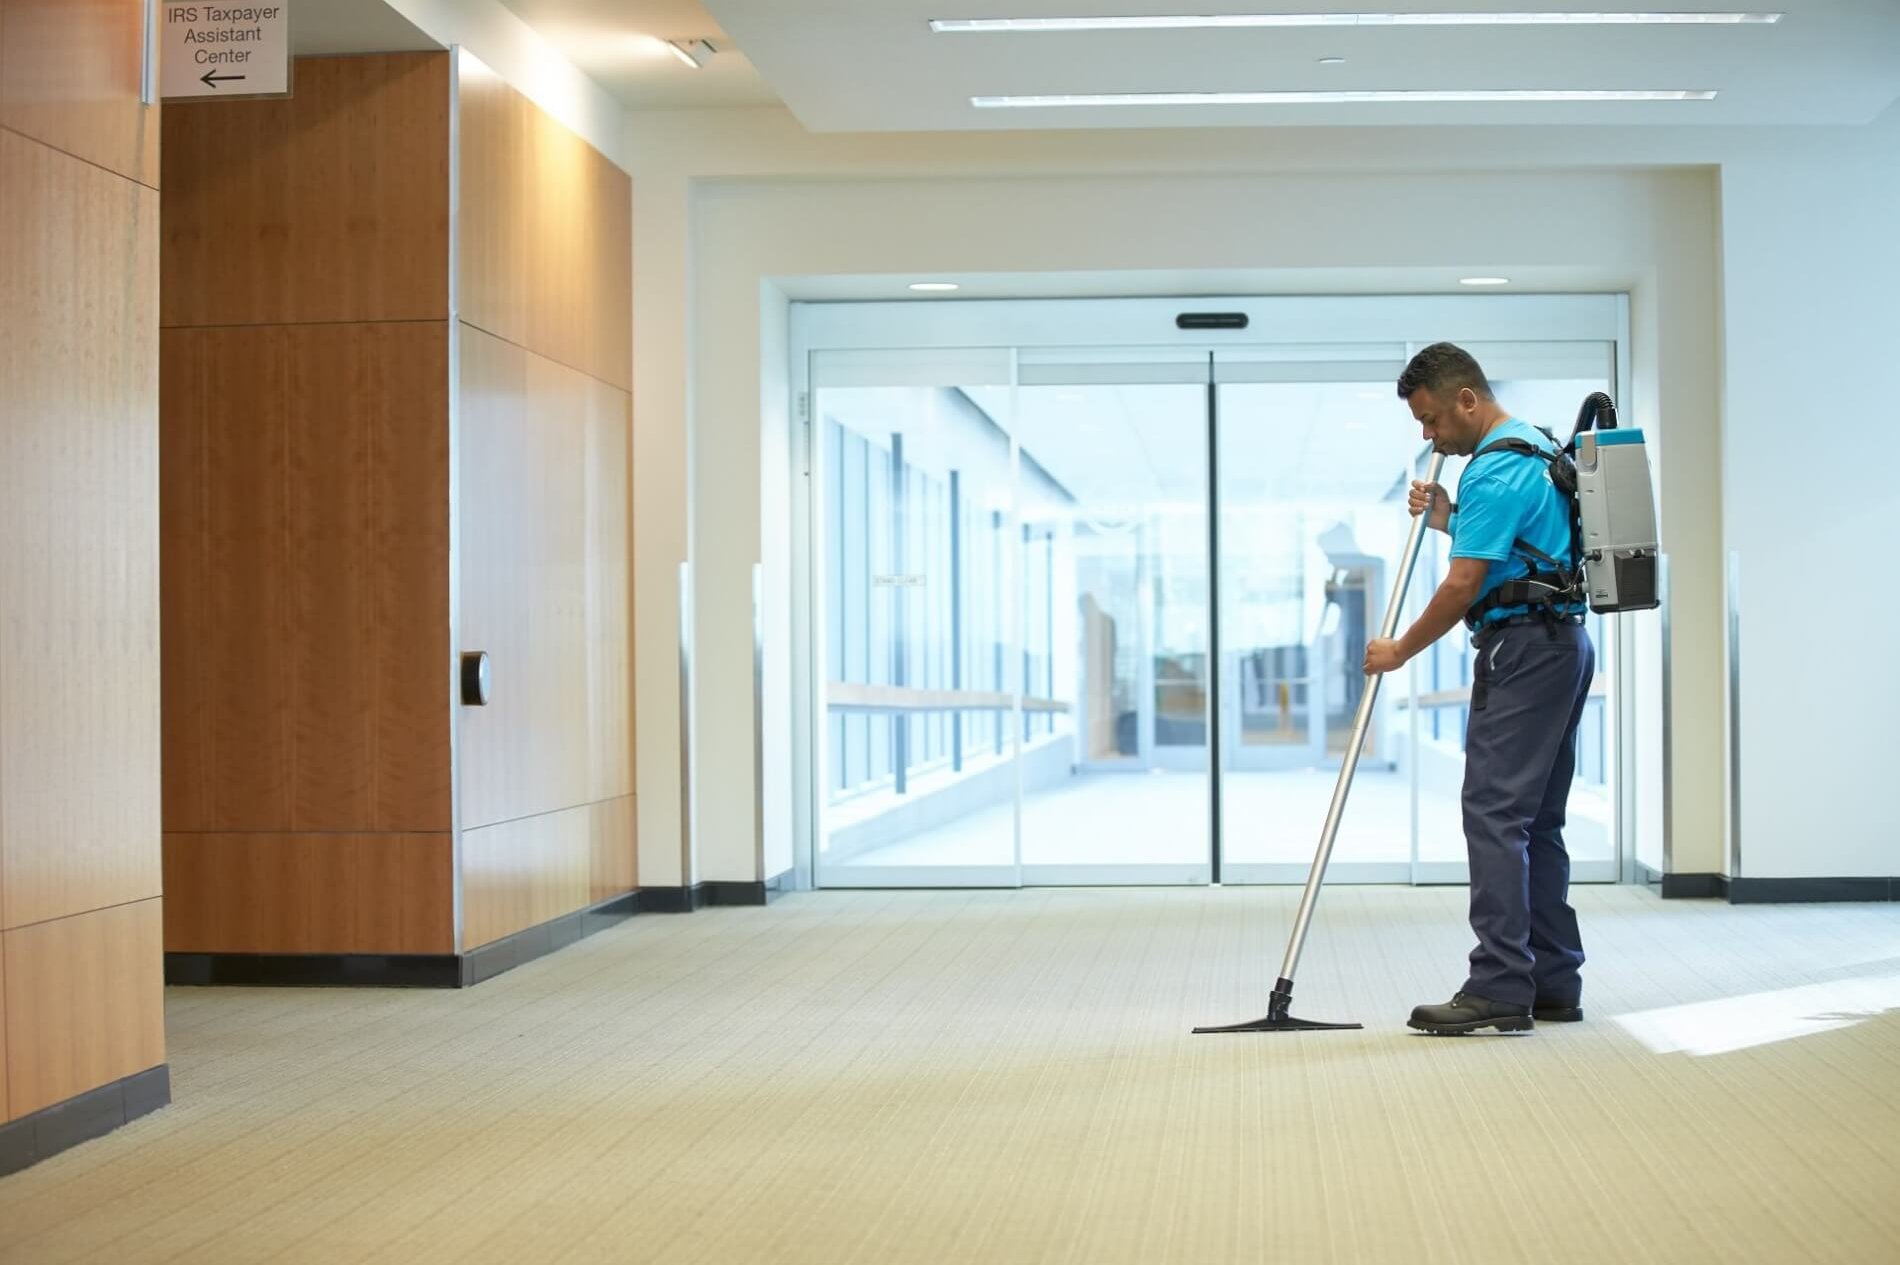 servicemaster clean technician cleaning floors in an office